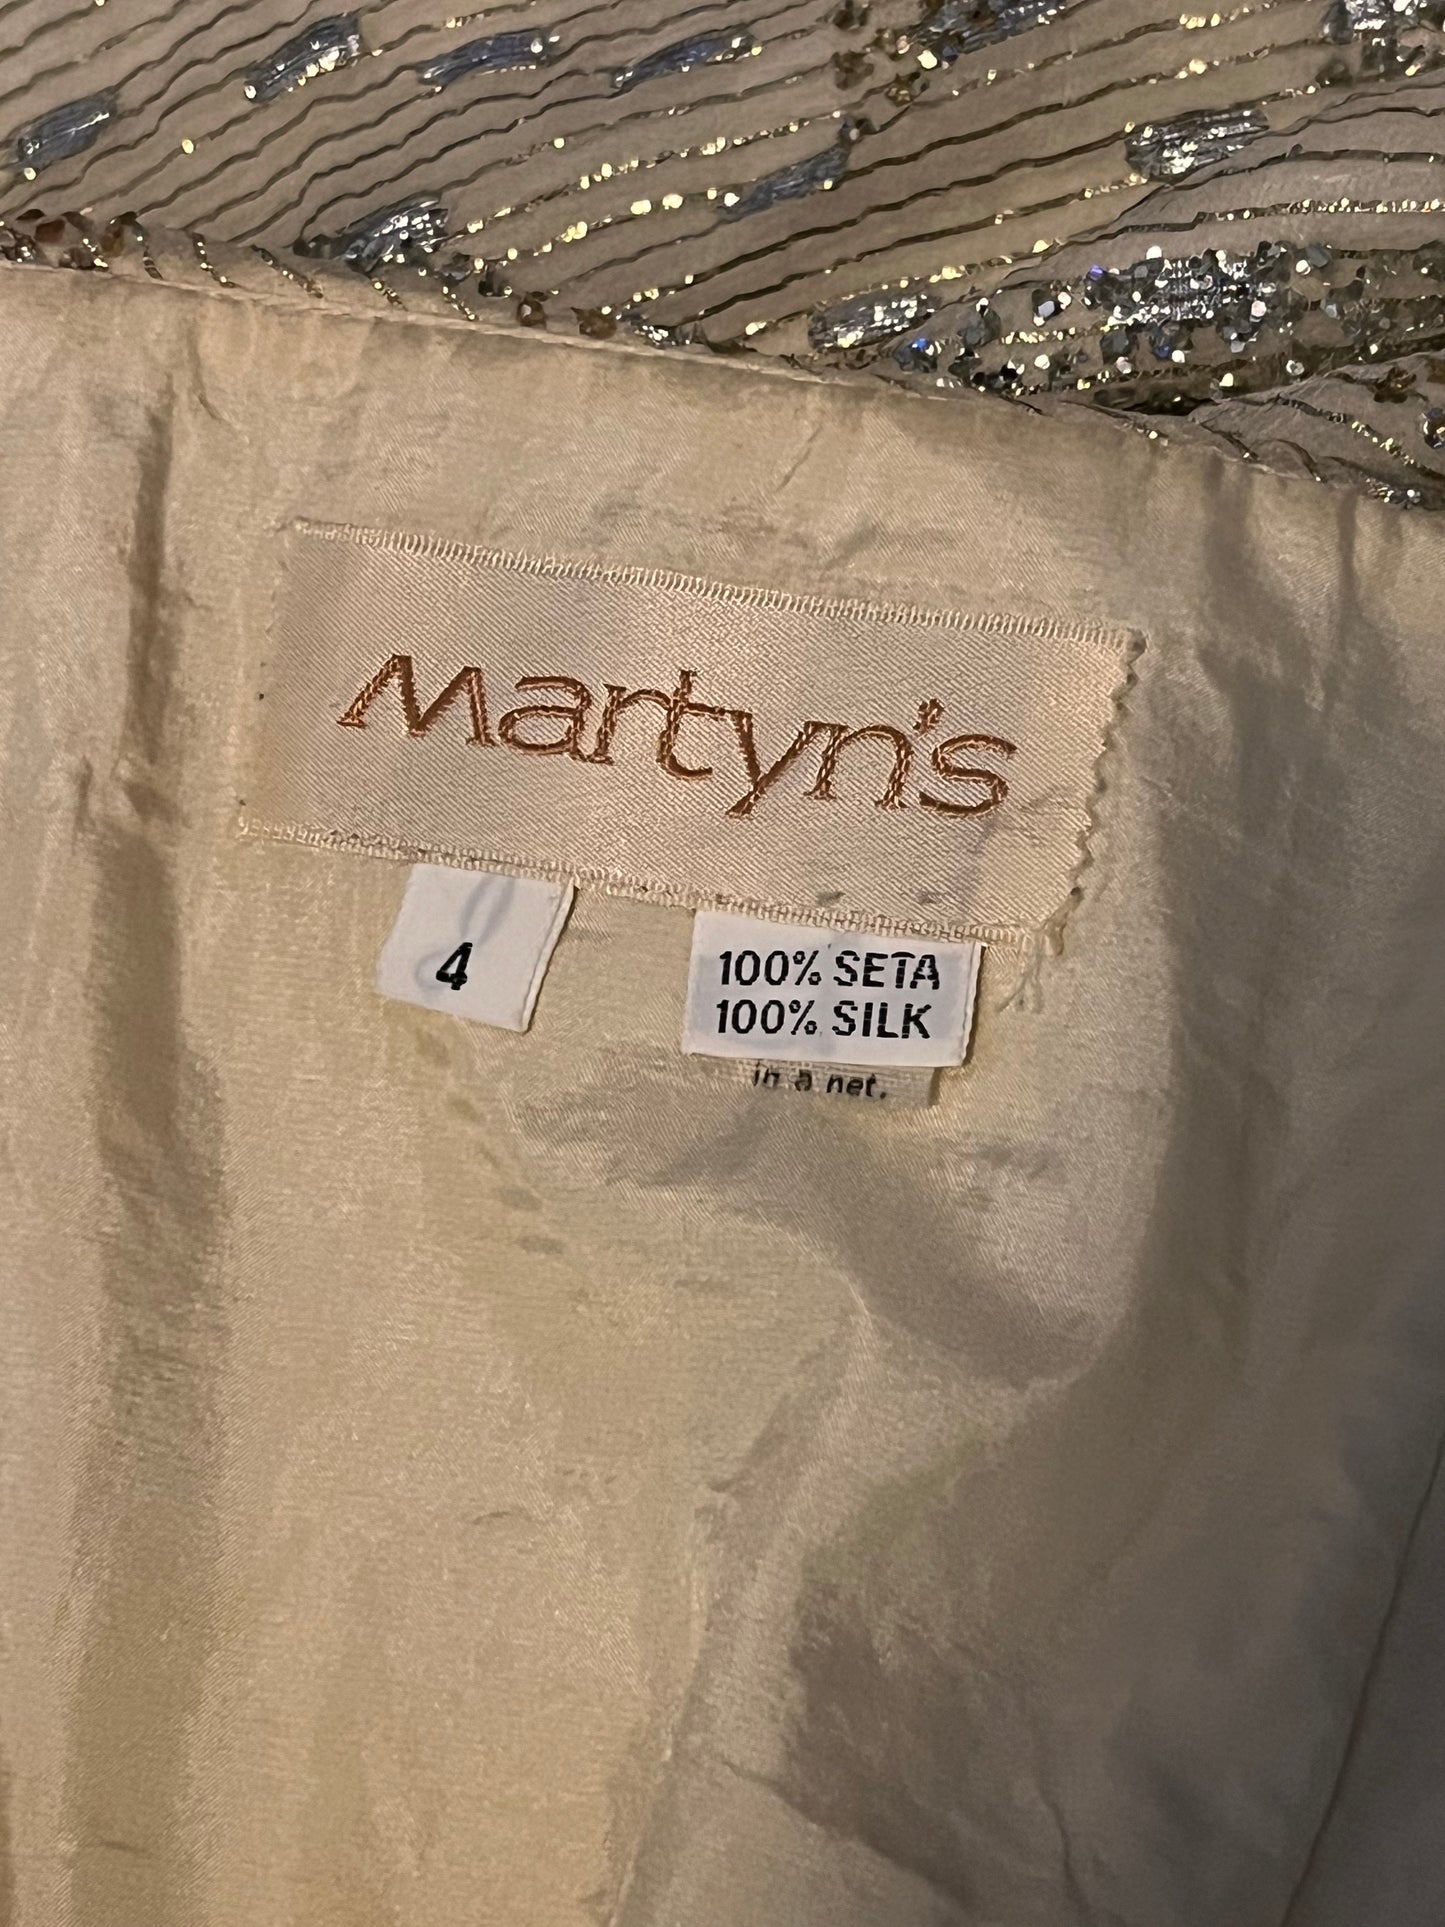 Vintage 1990's "Martyn's" Gold Glitter Evening Gown